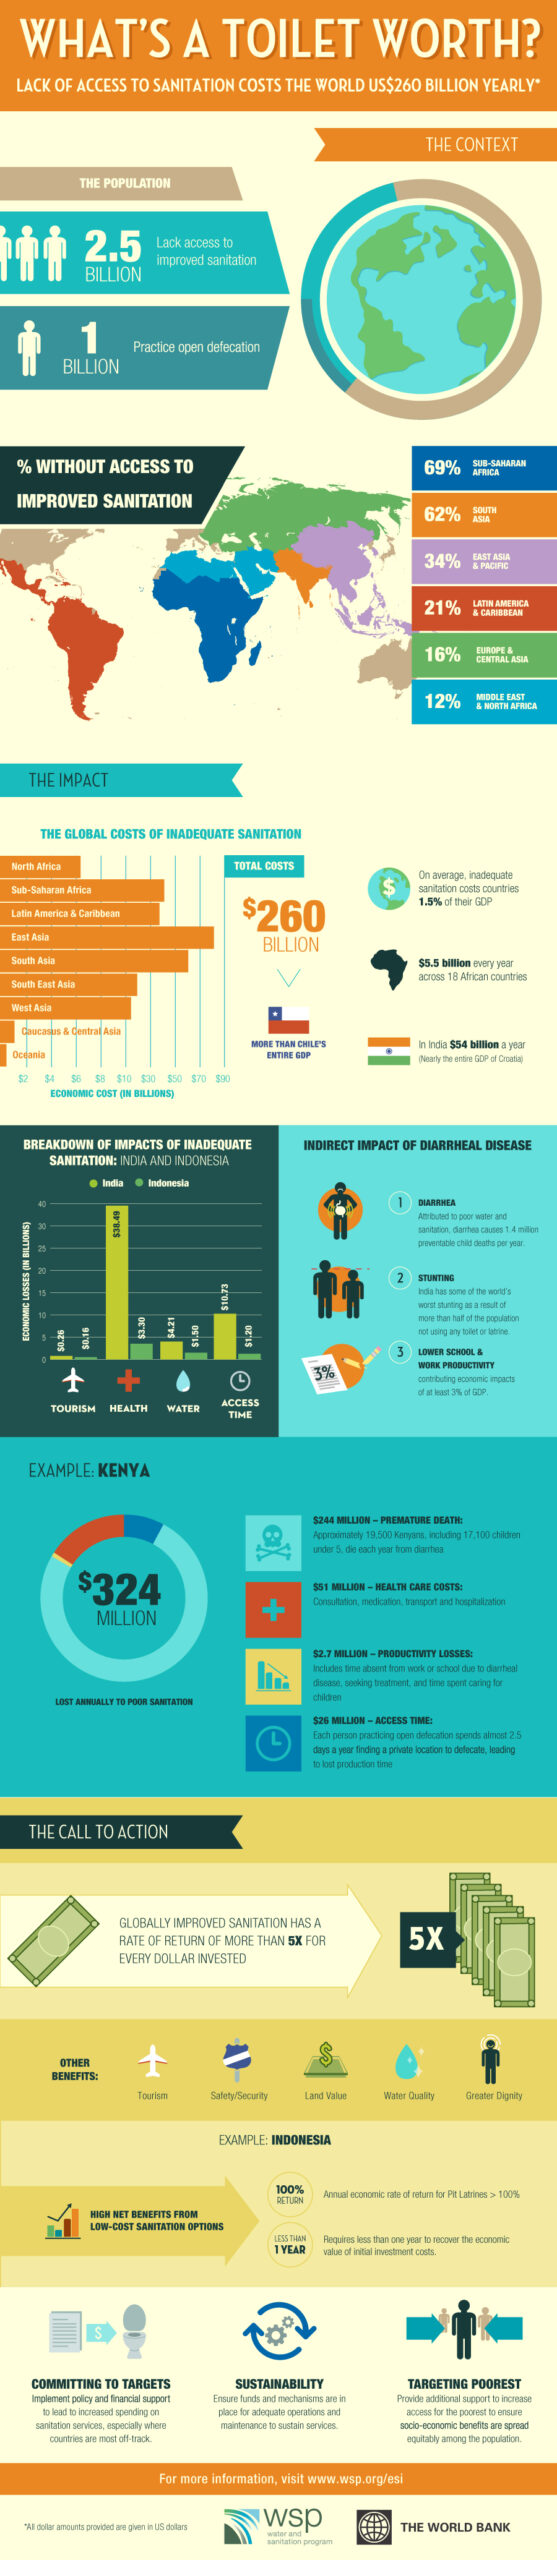 What's a Toilet Worth? The economics of sanitation - infographic